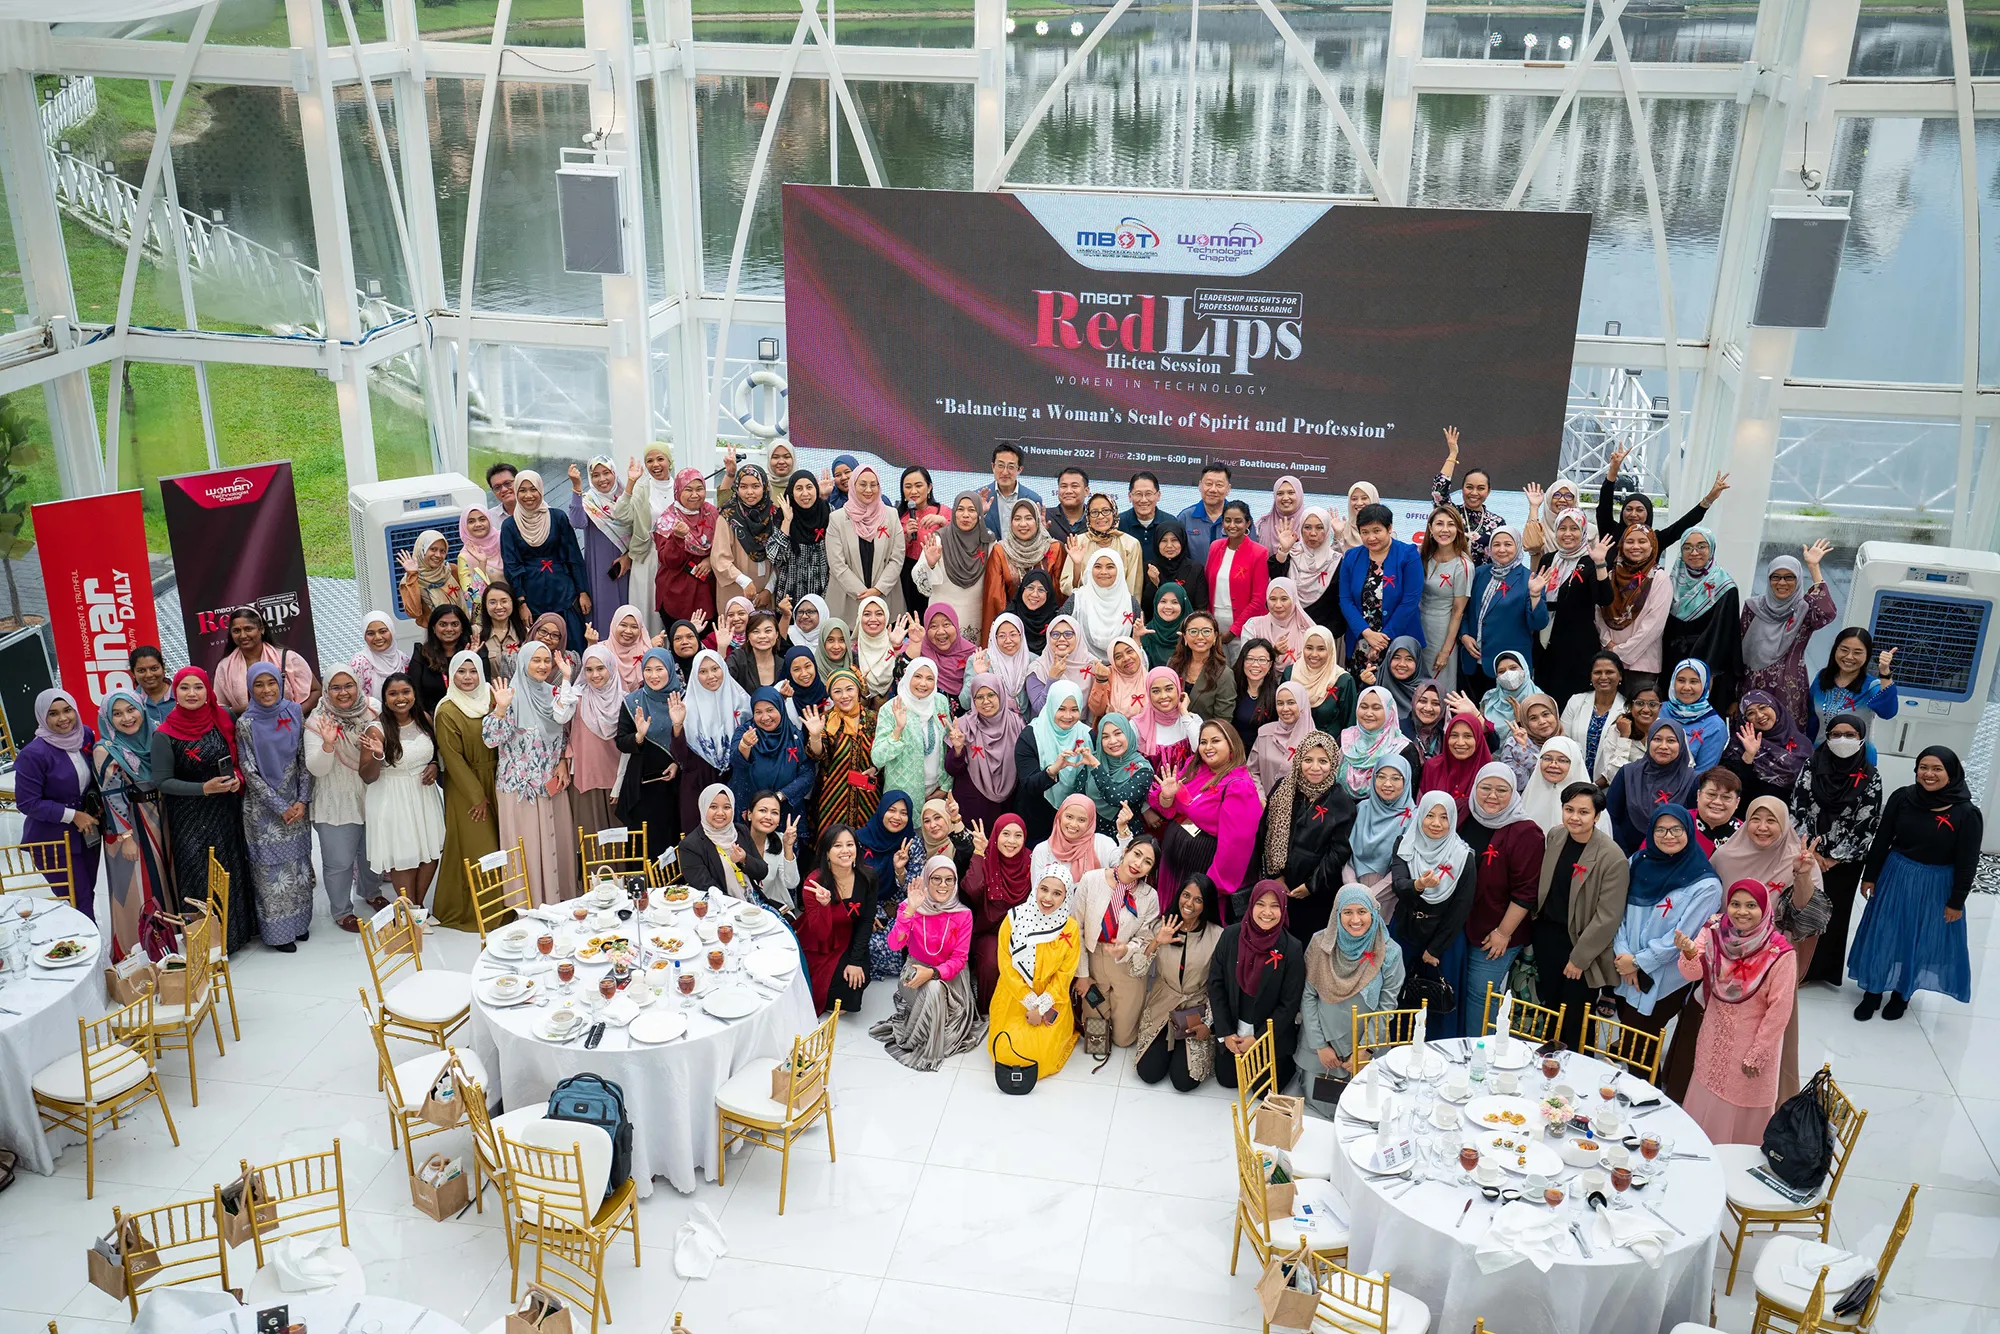 200 women leaders from across the country were invited to share their achievements at the MBOT Red LIPS Hi-Tea